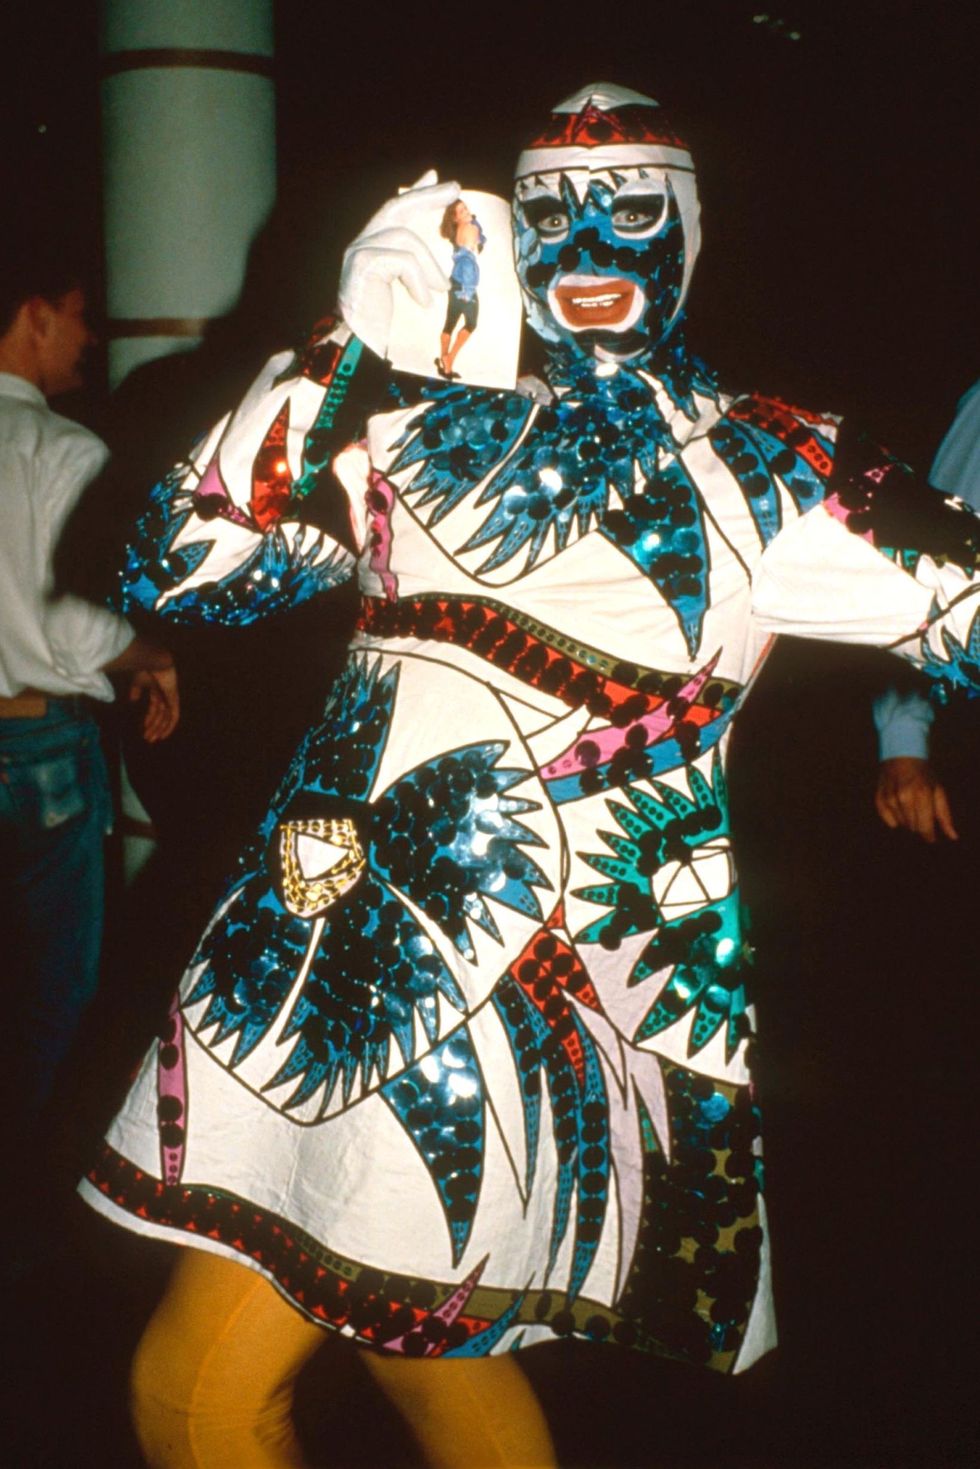 leigh-bowery-1988-rexfeatures-150243a.jpg